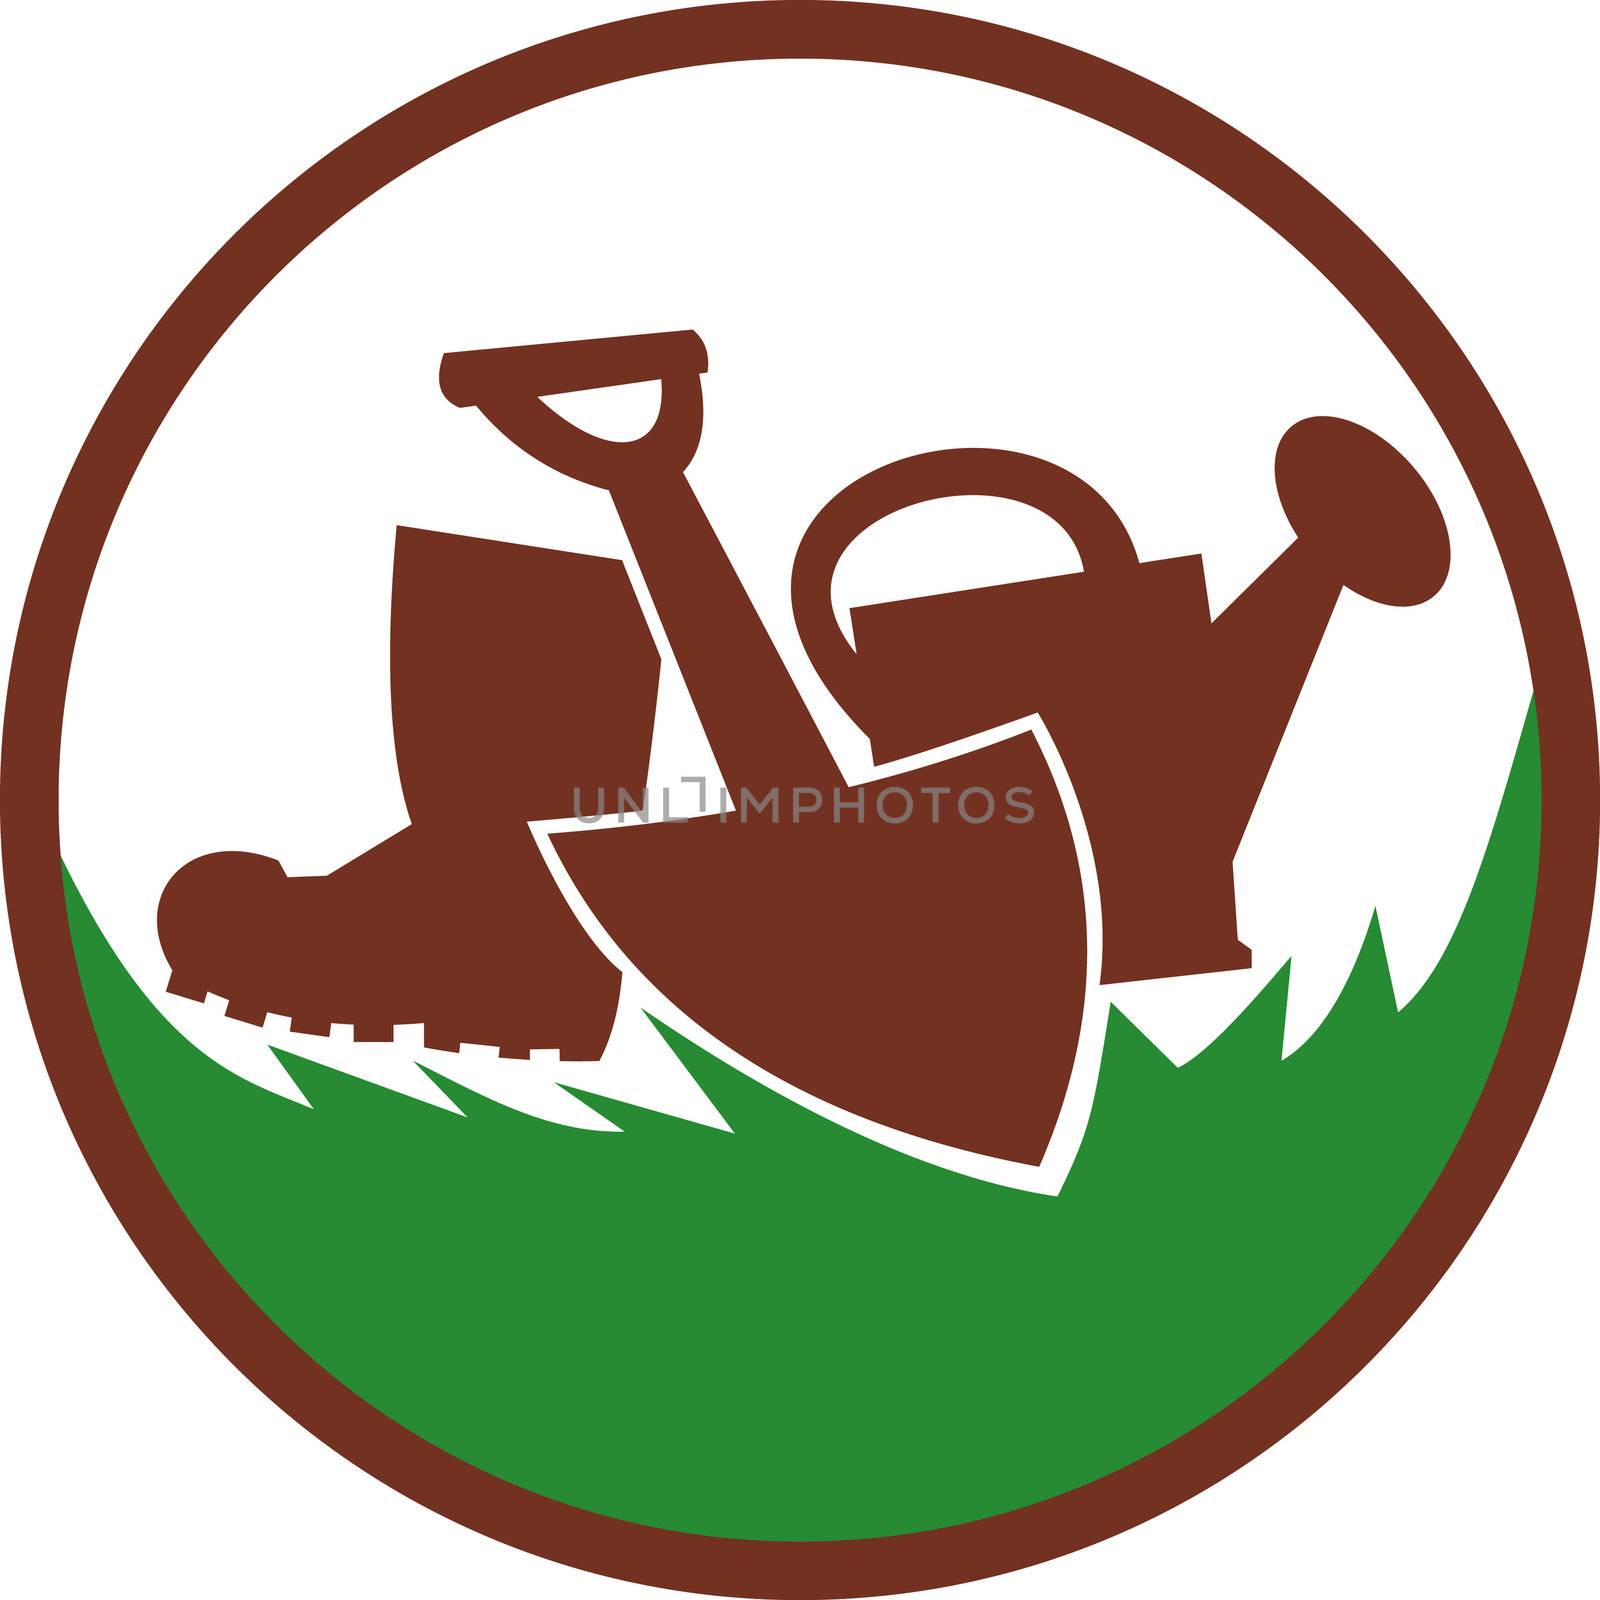 illustration of an icon or symbol for landscape gardener,horticulturist showing a watering can,shovel and gumboots.